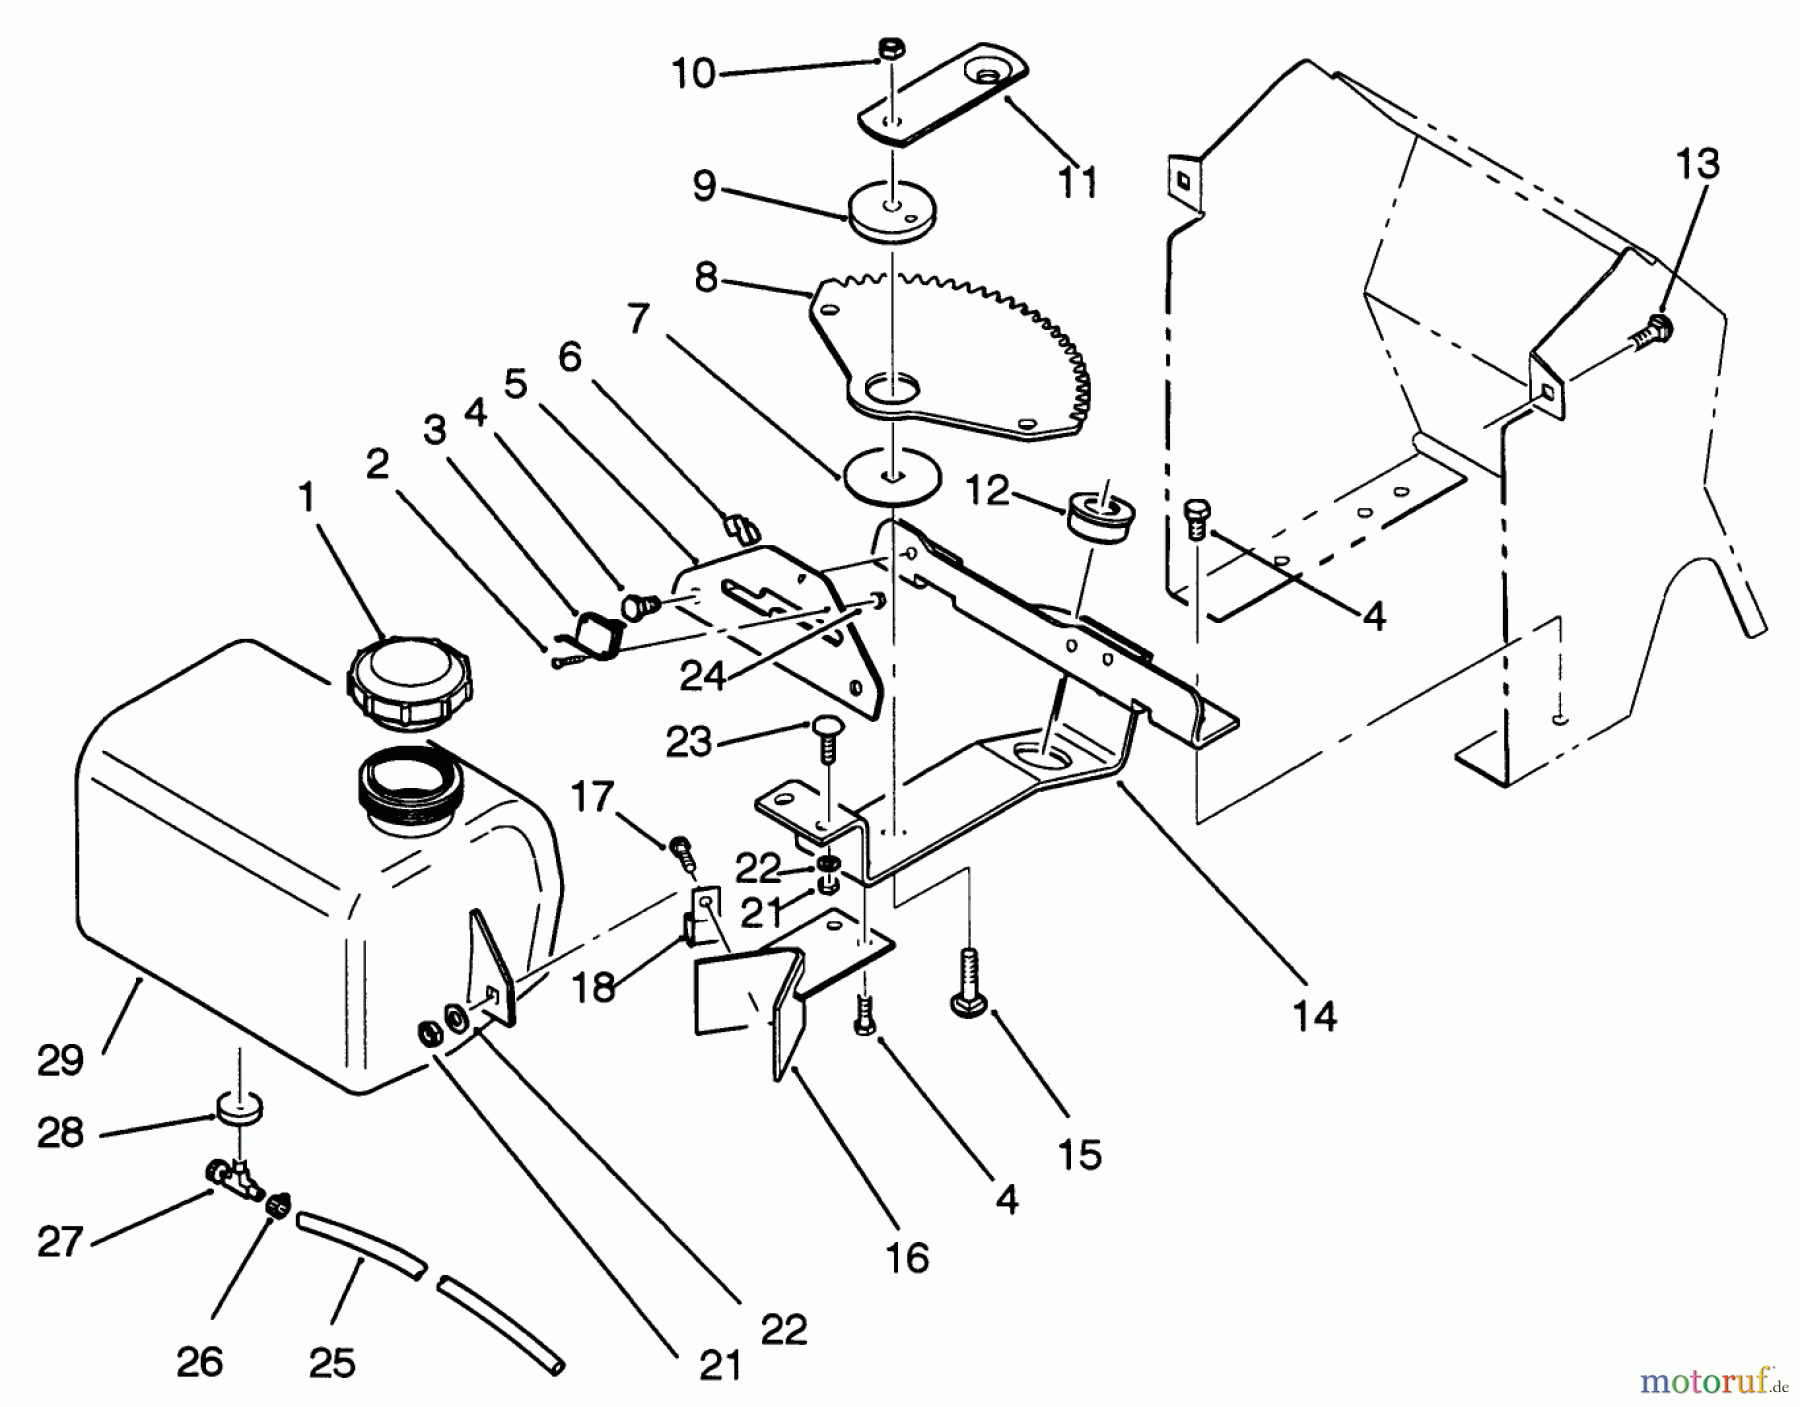  Toro Neu Mowers, Lawn & Garden Tractor Seite 1 22-14OE02 (244-H) - Toro 244-H Yard Tractor, 1992 (2000001-2999999) FUEL TANK AND STEERING BRACKET ASSEMBLY